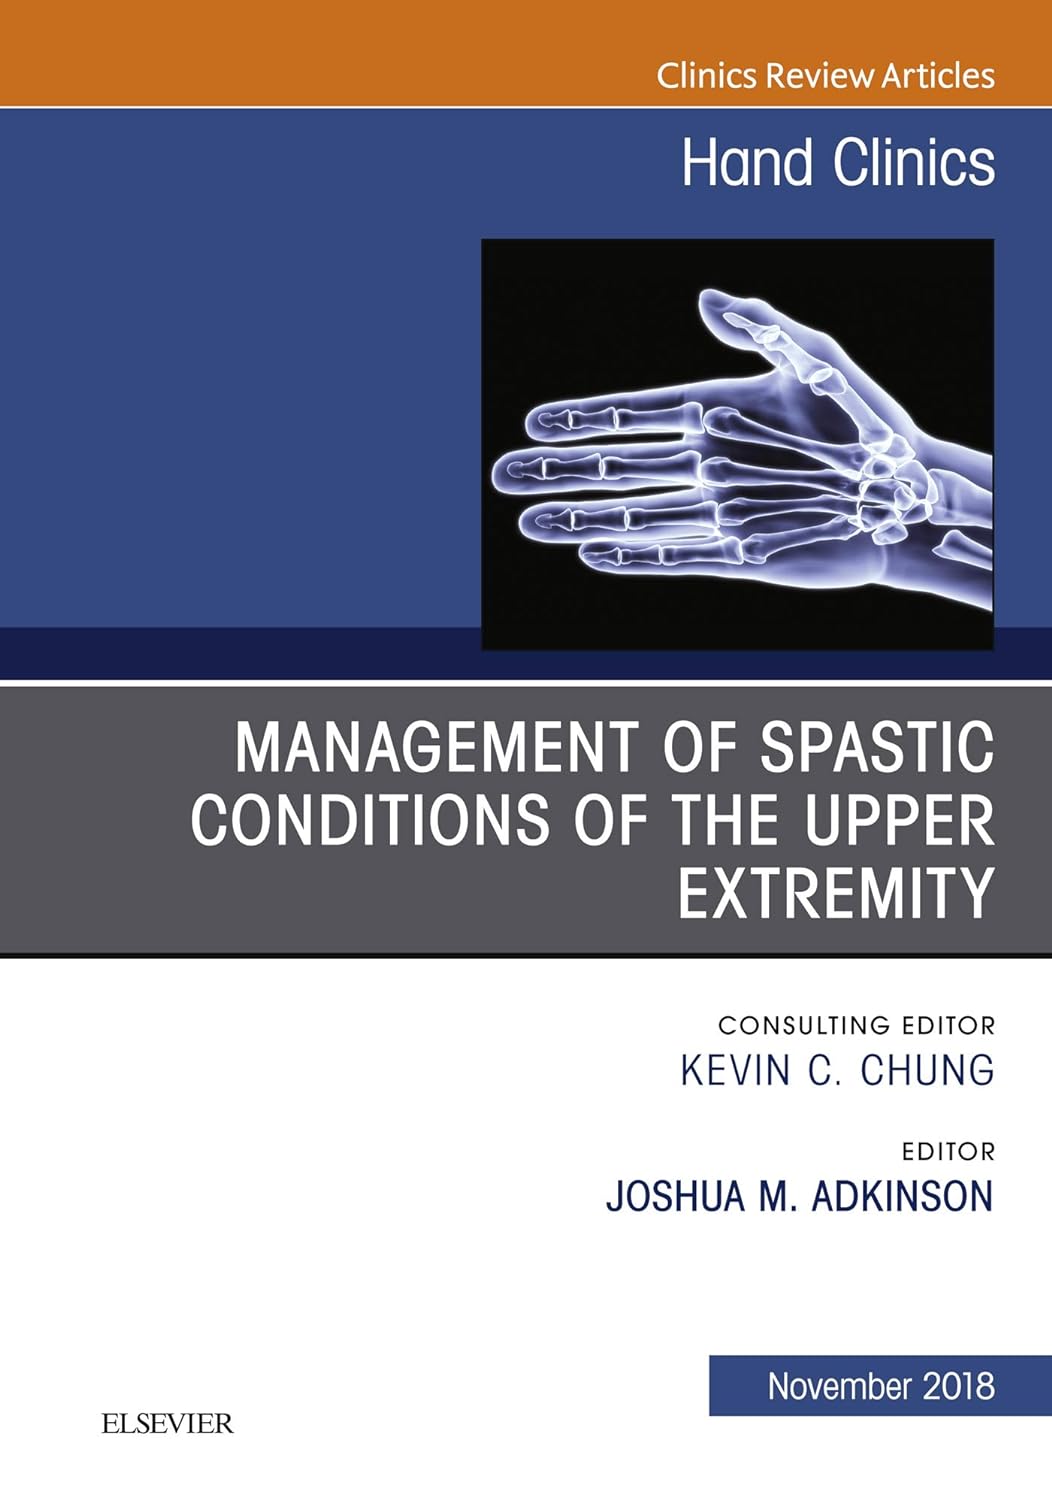 Management of Spastic Conditions of the Upper Extremity, An Issue of Hand Clinics (Volume 34-4) (The Clinics: Orthopedics, Volume 34-4) by  Joshua M Adkinson 